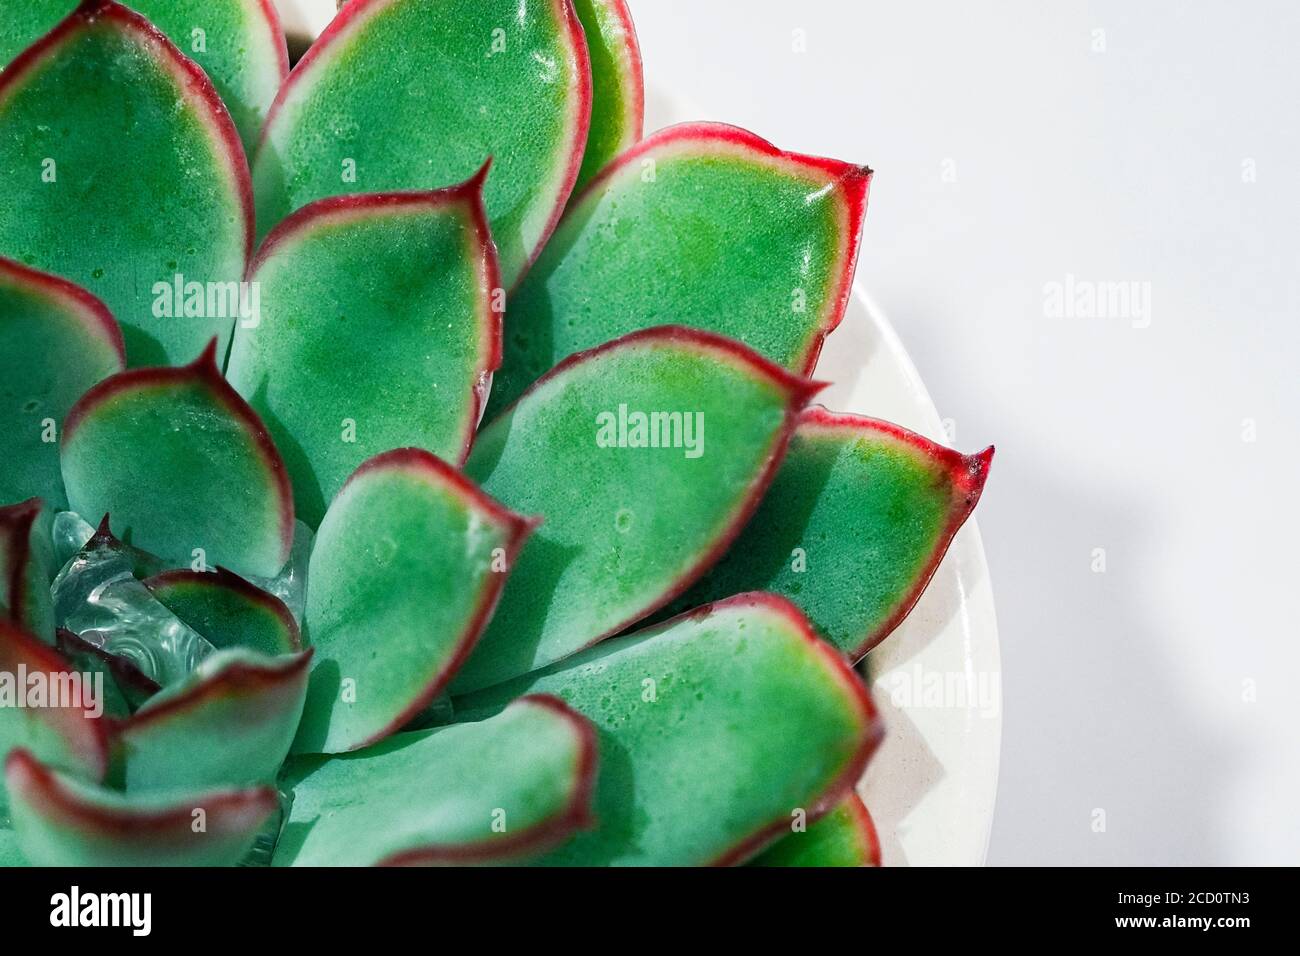 Echeveria succulent plant with spikey green leaves and red margins indoor Stock Photo